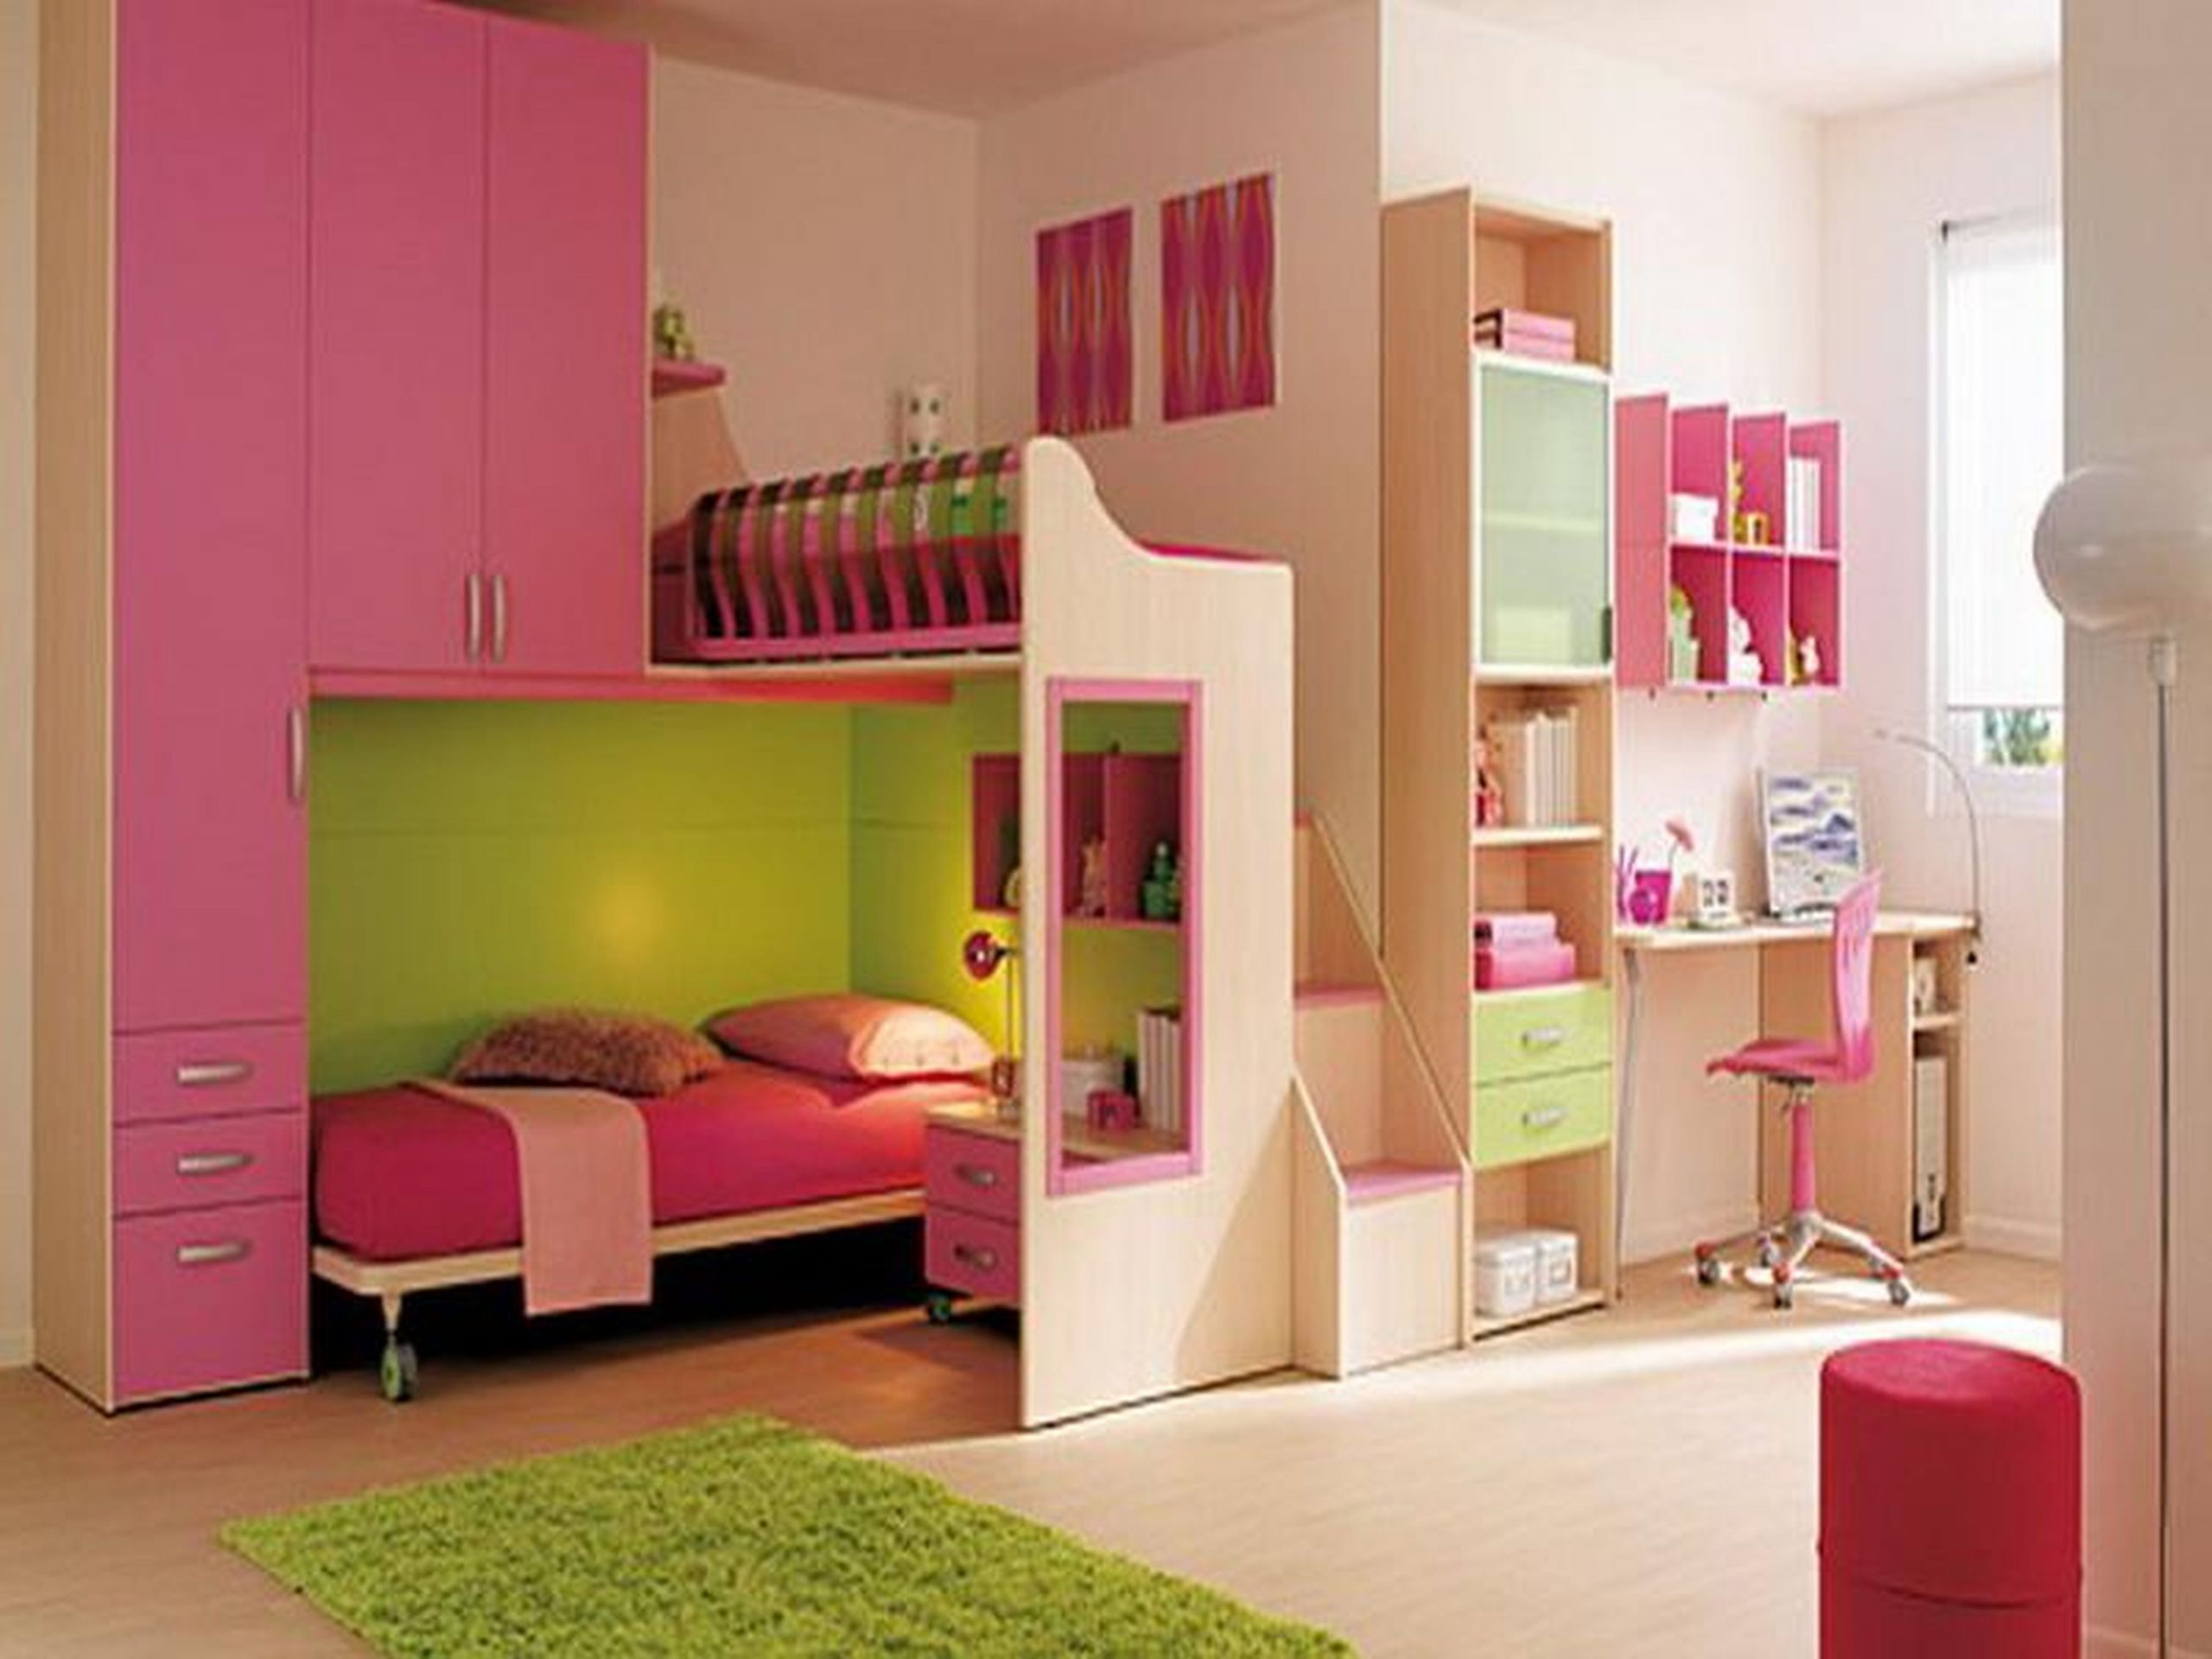 DIY For Kids Rooms
 DIY Storage Ideas For Kids Room Crafts To Do With Kids